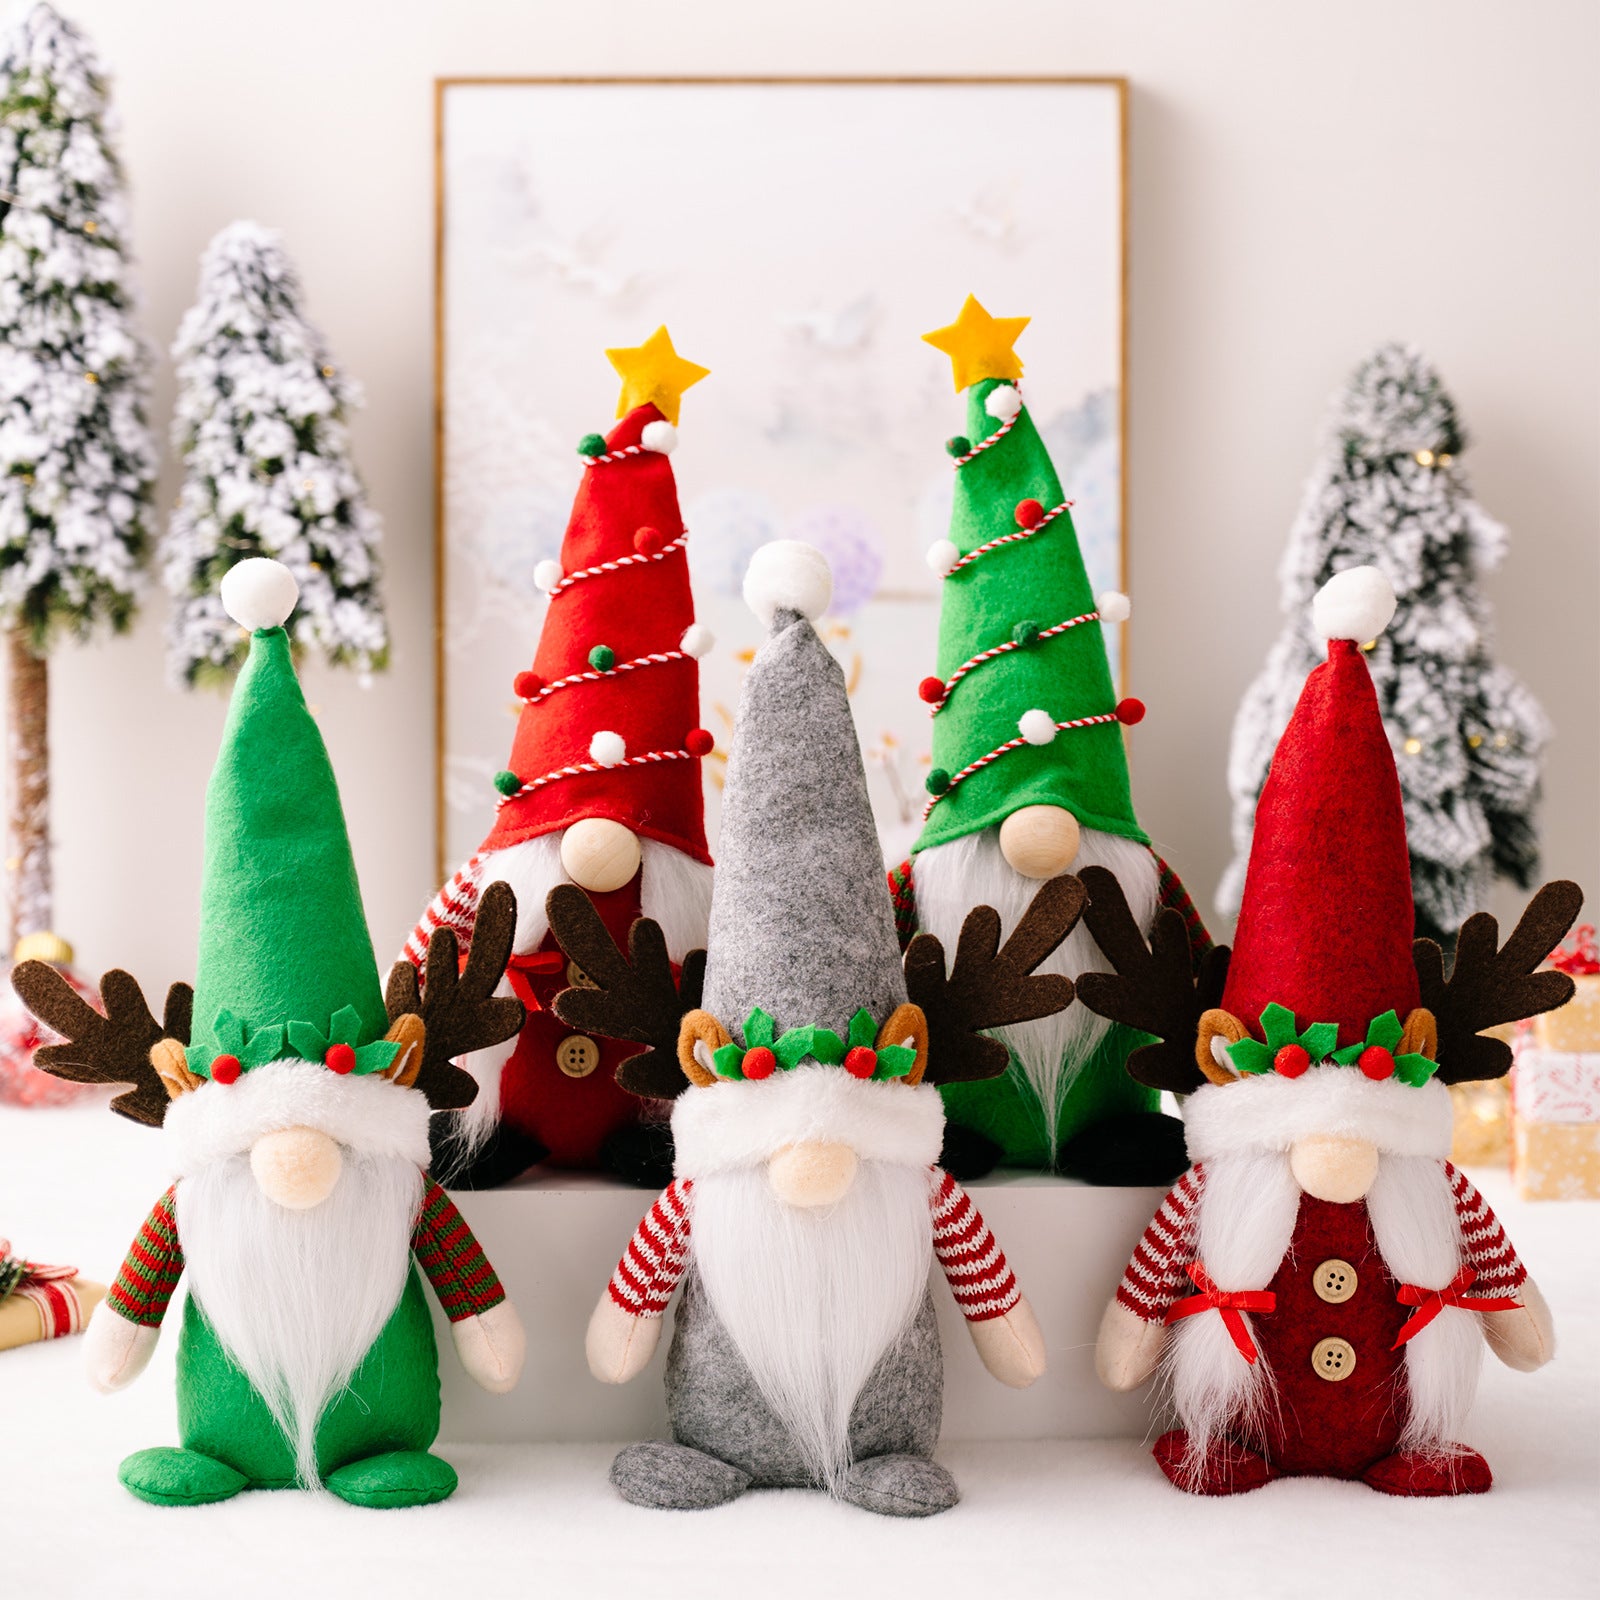 Christmas Is the Most Loveable Celebration For Americans and Christmas Decoration their Always the First Priority That's We Are Here With Christmas Decoration Gnomes, Xmas Gnomes, Santa Gnomes, DIY gnomes, Gnome Christmas Tree, Nordic gnomes, Tomato Cage Gnomes, Plush Gnomes.